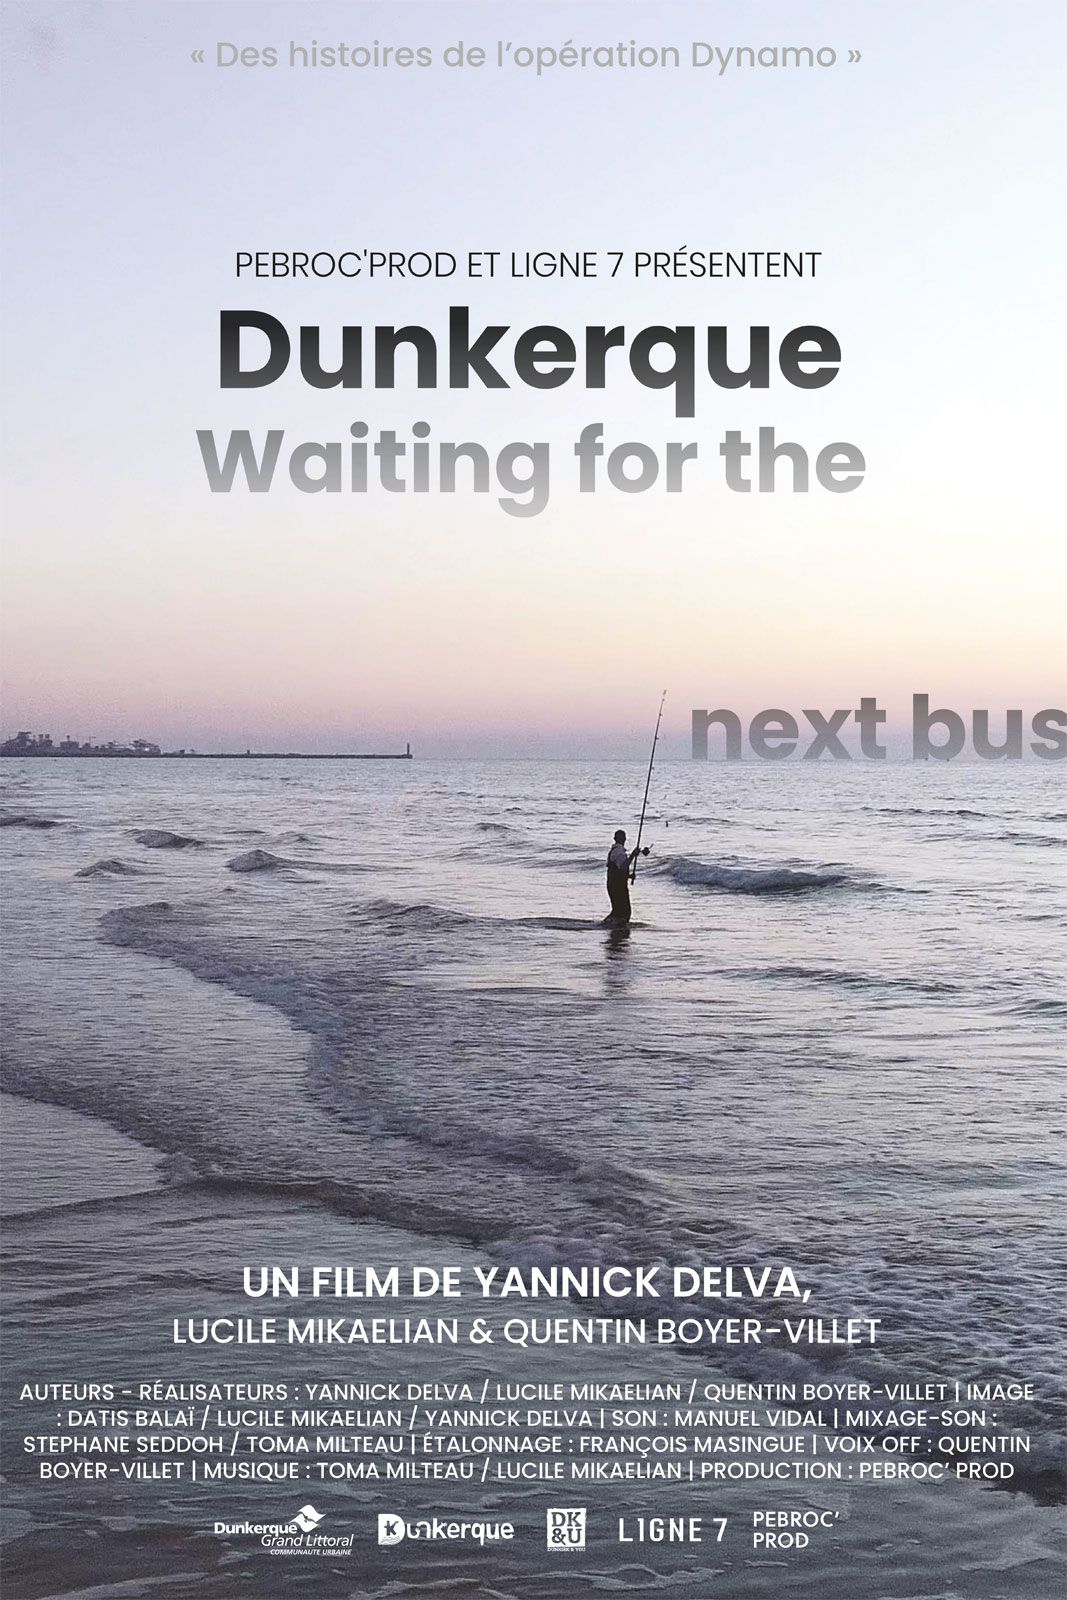 Dunkerque, Waiting For The Next Bus - Documentaire (2019) streaming VF gratuit complet